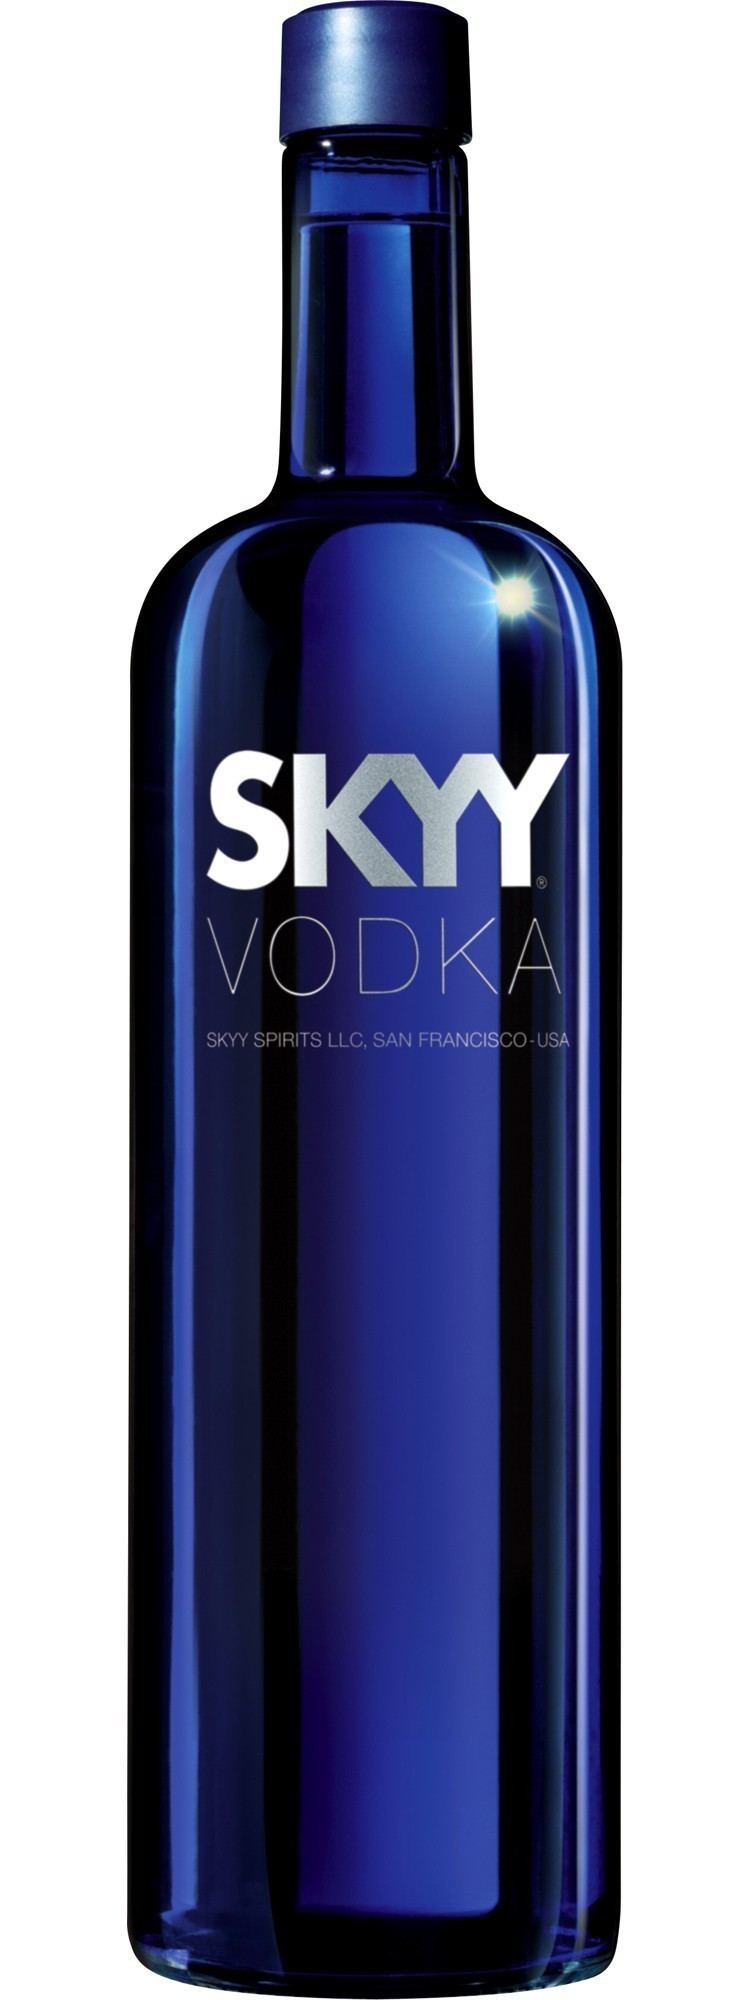 SKYY vodka SKYY VODKA 1 Litre available for Home delivery and Brisbane